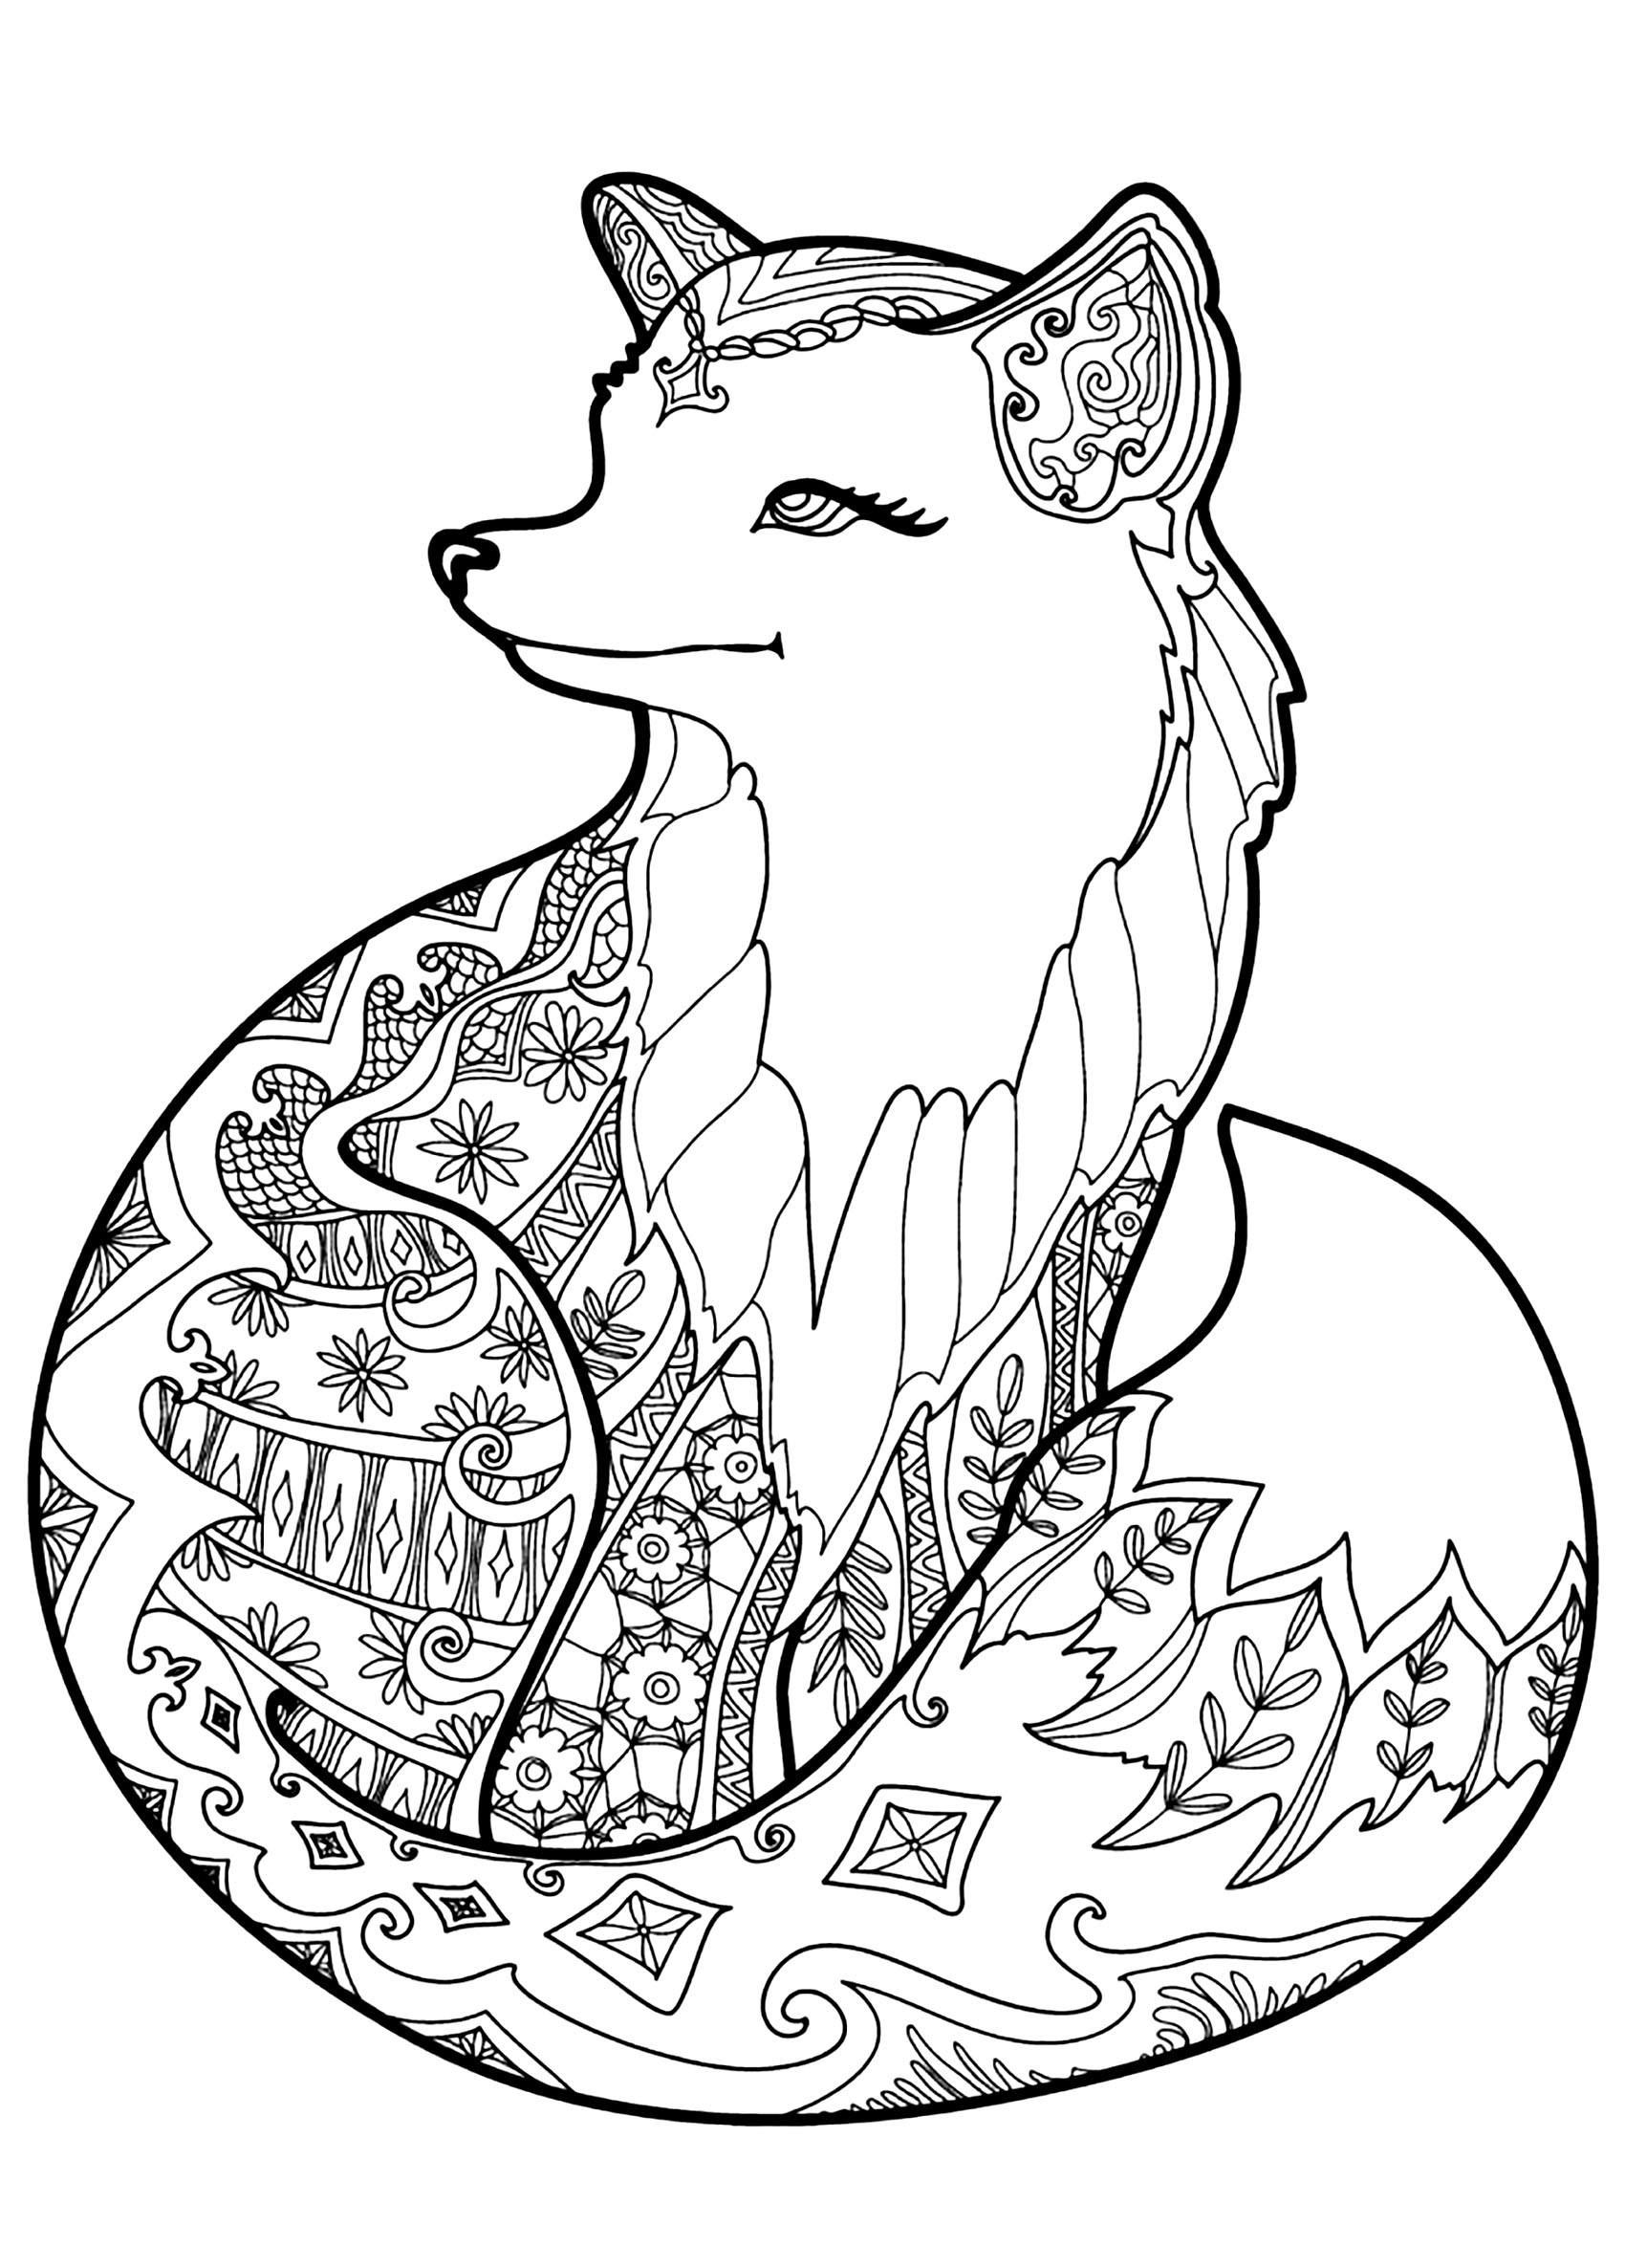 Download Fox with beautiful patterns - Foxes Adult Coloring Pages